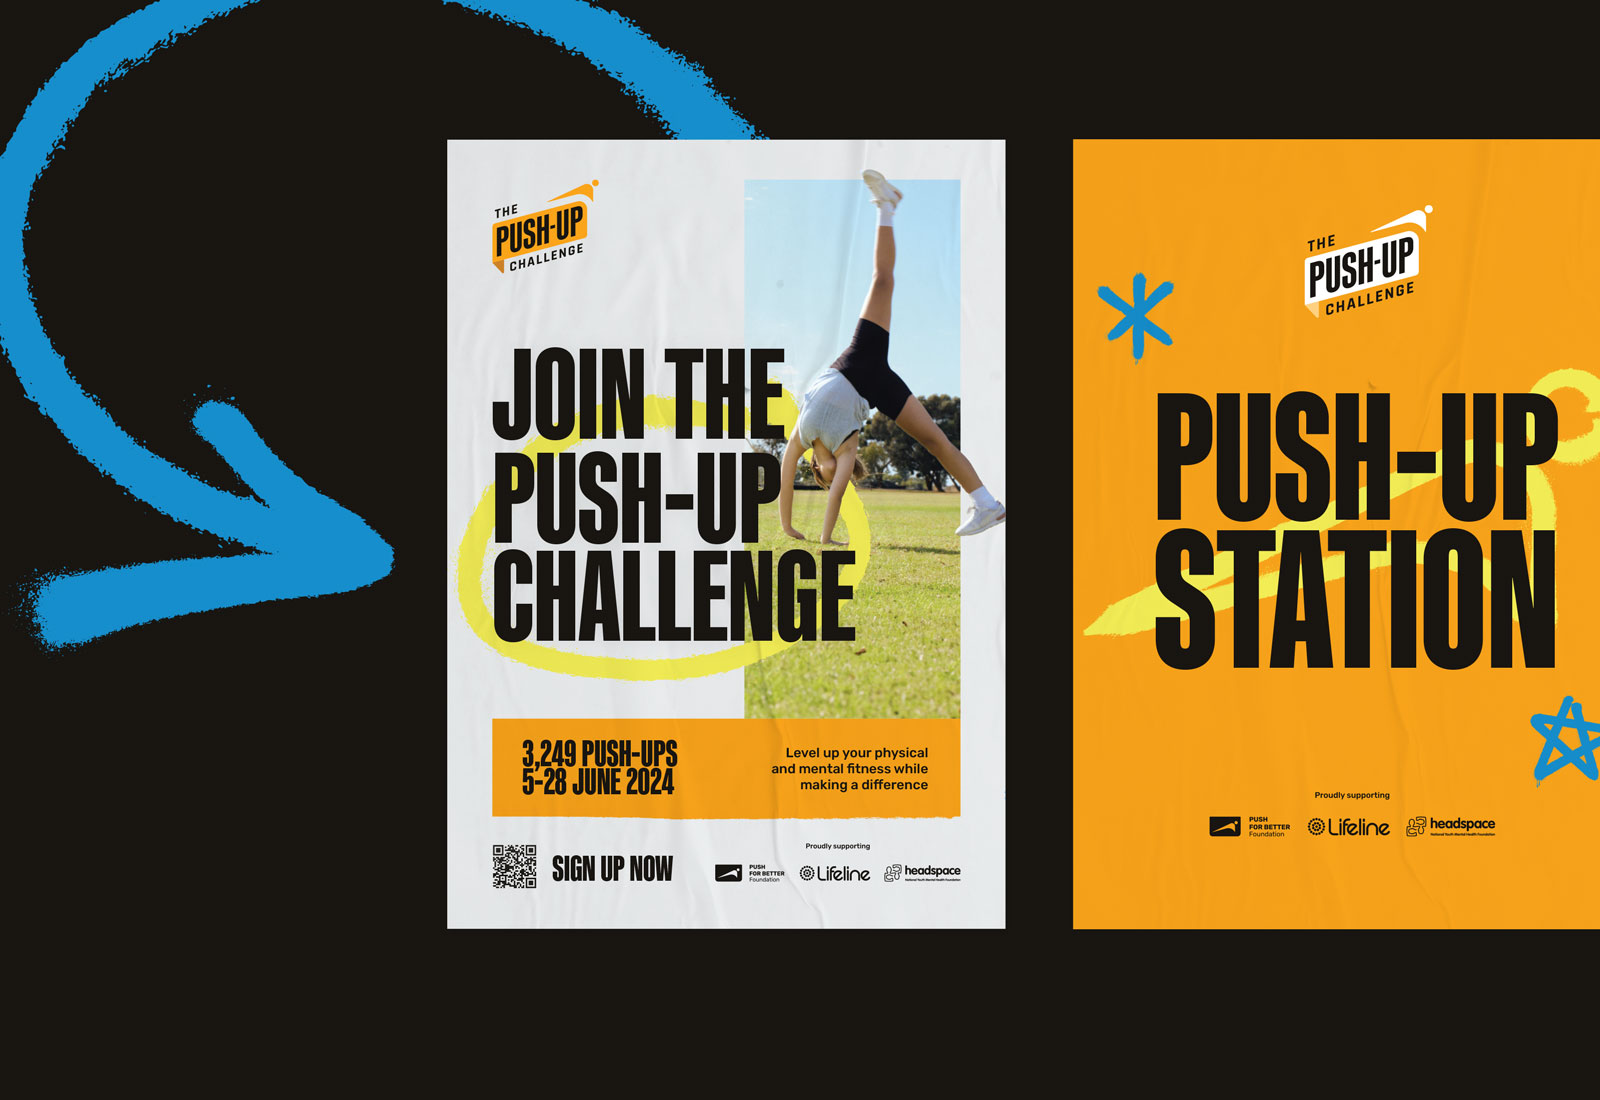 The Push-Up Challenge branded posters